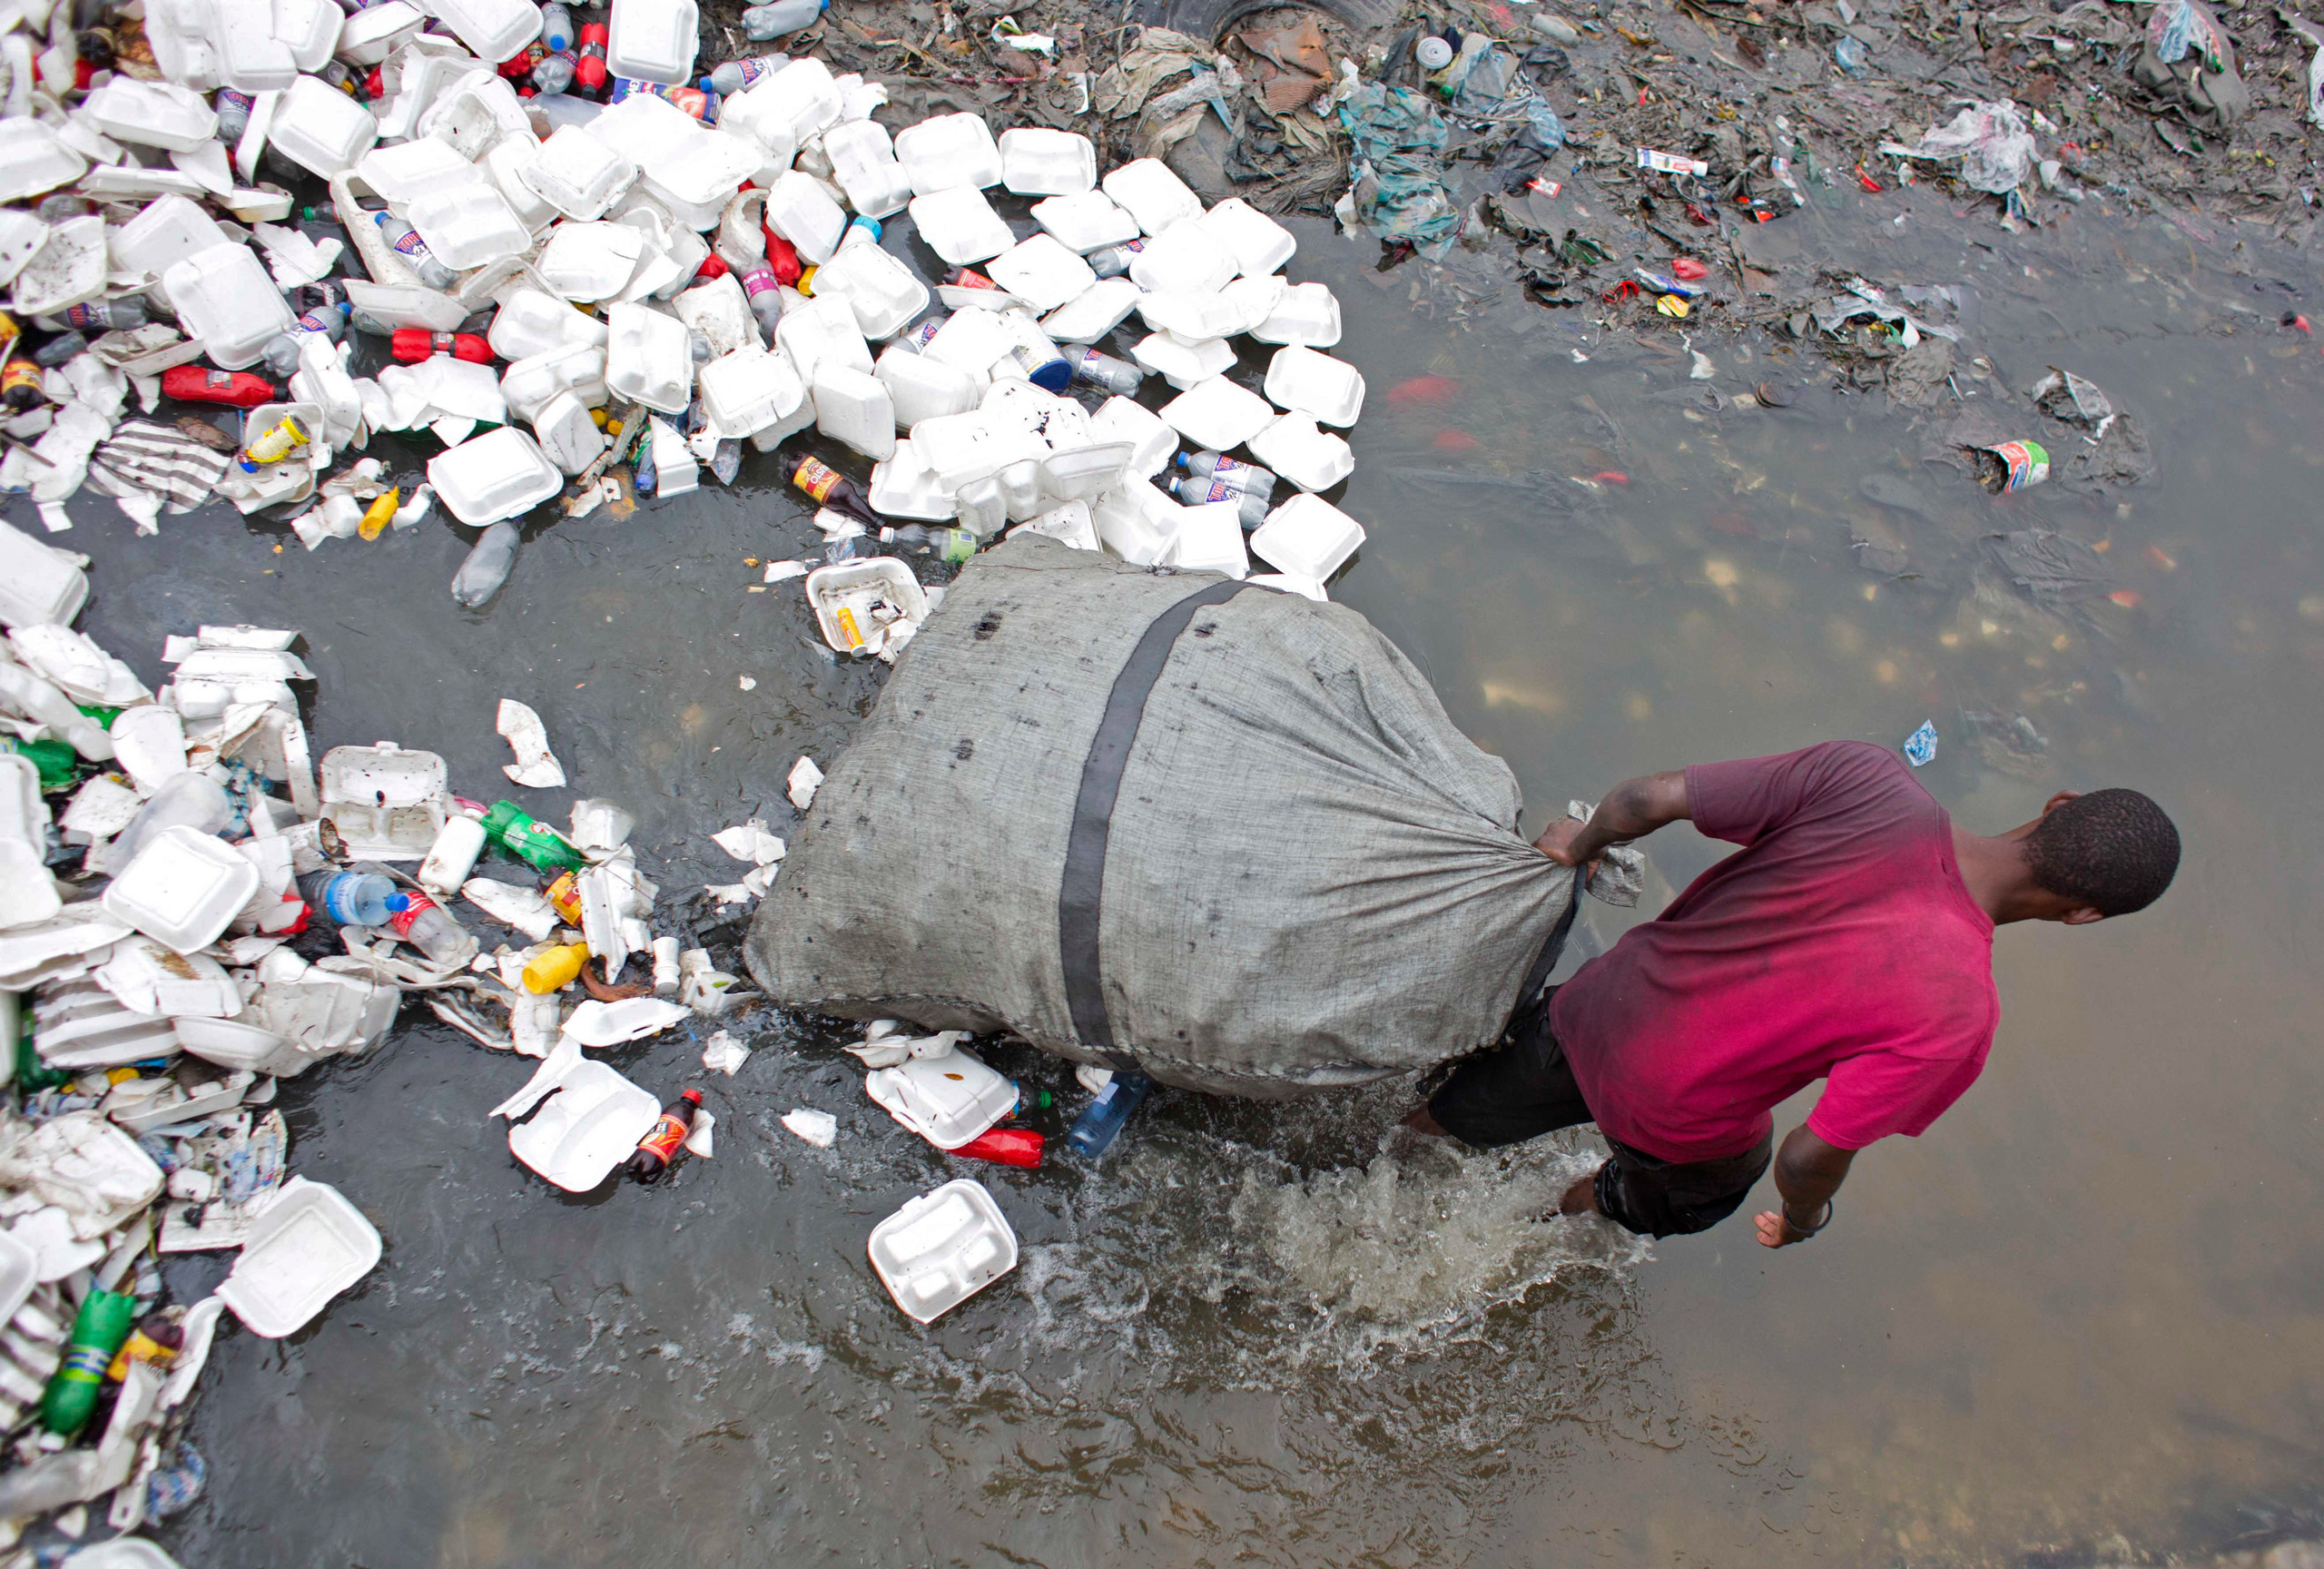 A man wades through a garbage filled water canal in downtown Port-au-Prince, Haiti, on Feb. 28, 2016. Scientists believe cholera was introduced to the country's biggest river by inadequately treated sewage from a base of U.N. peacekeepers. (Dieu Nalio Chery—AP)